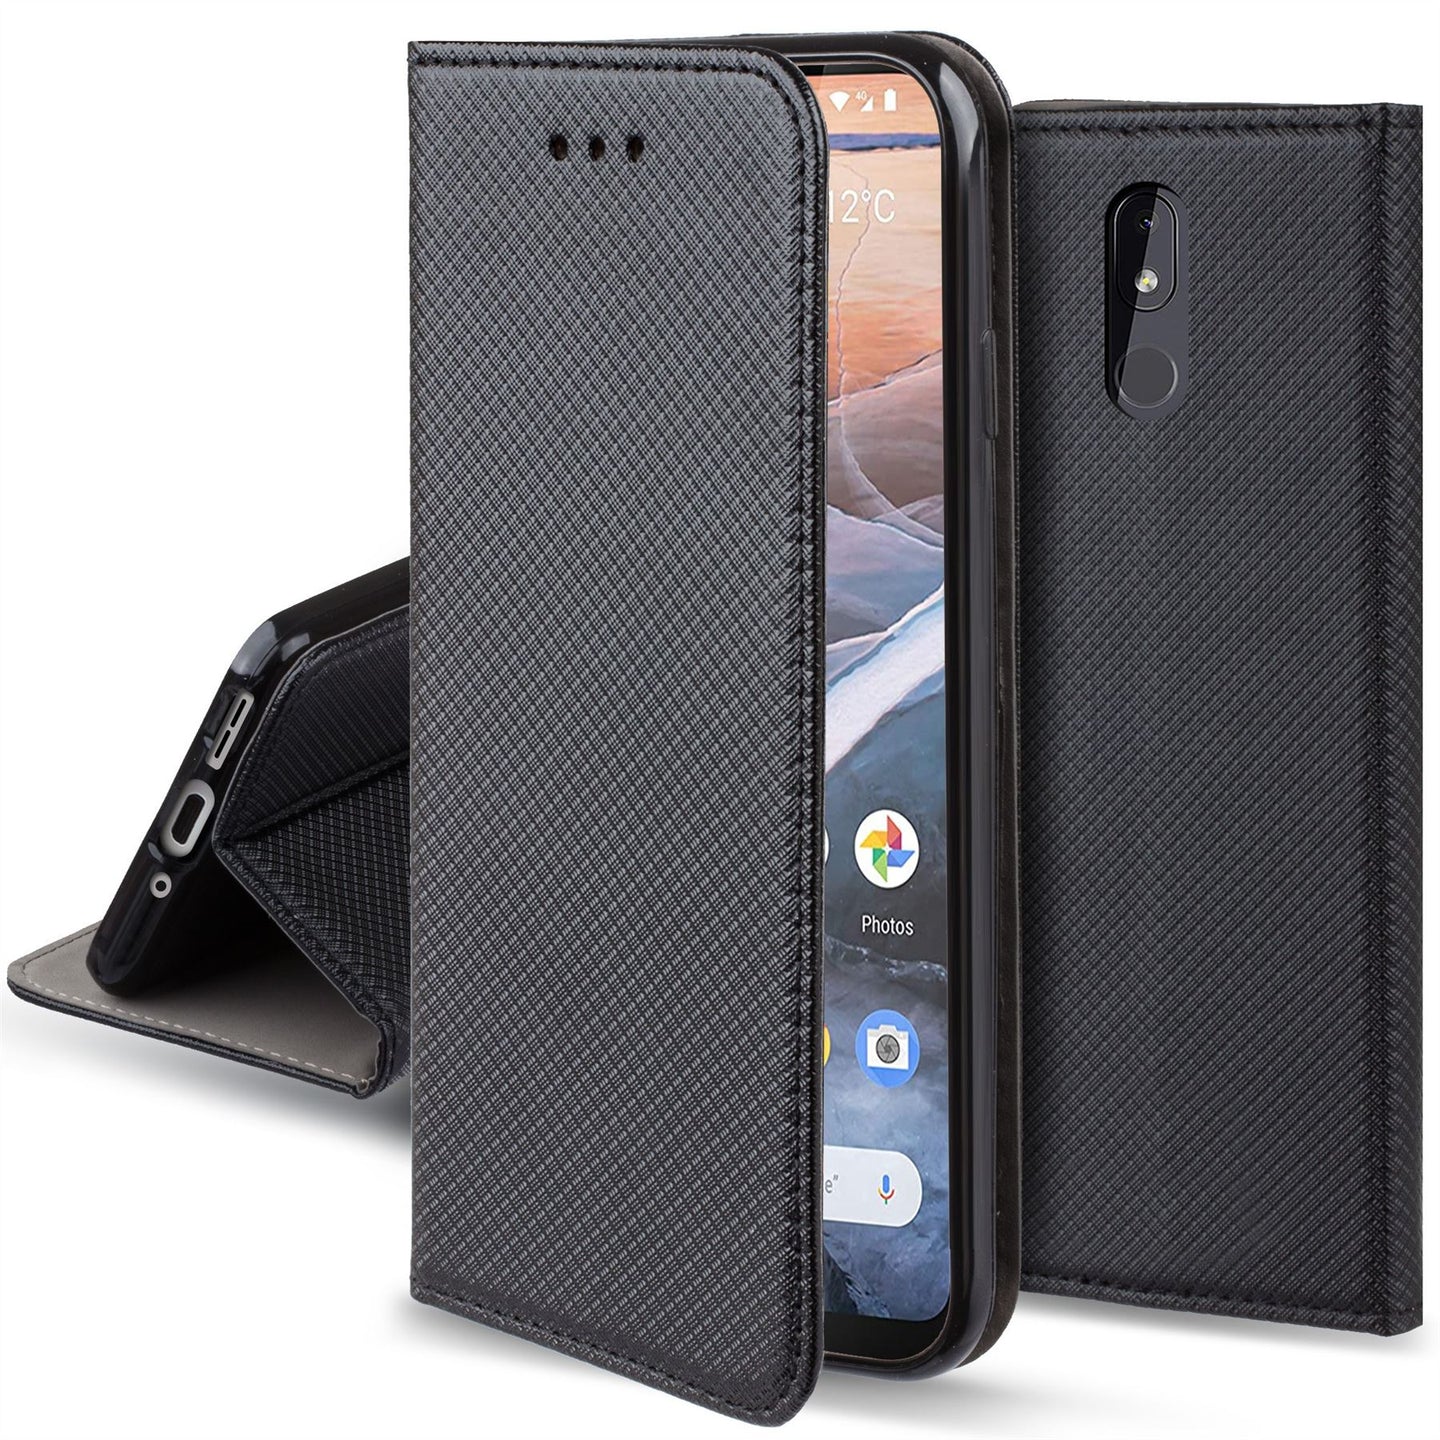 Moozy Case Flip Cover for Nokia 3.2, Black - Smart Magnetic Flip Case with Card Holder and Stand